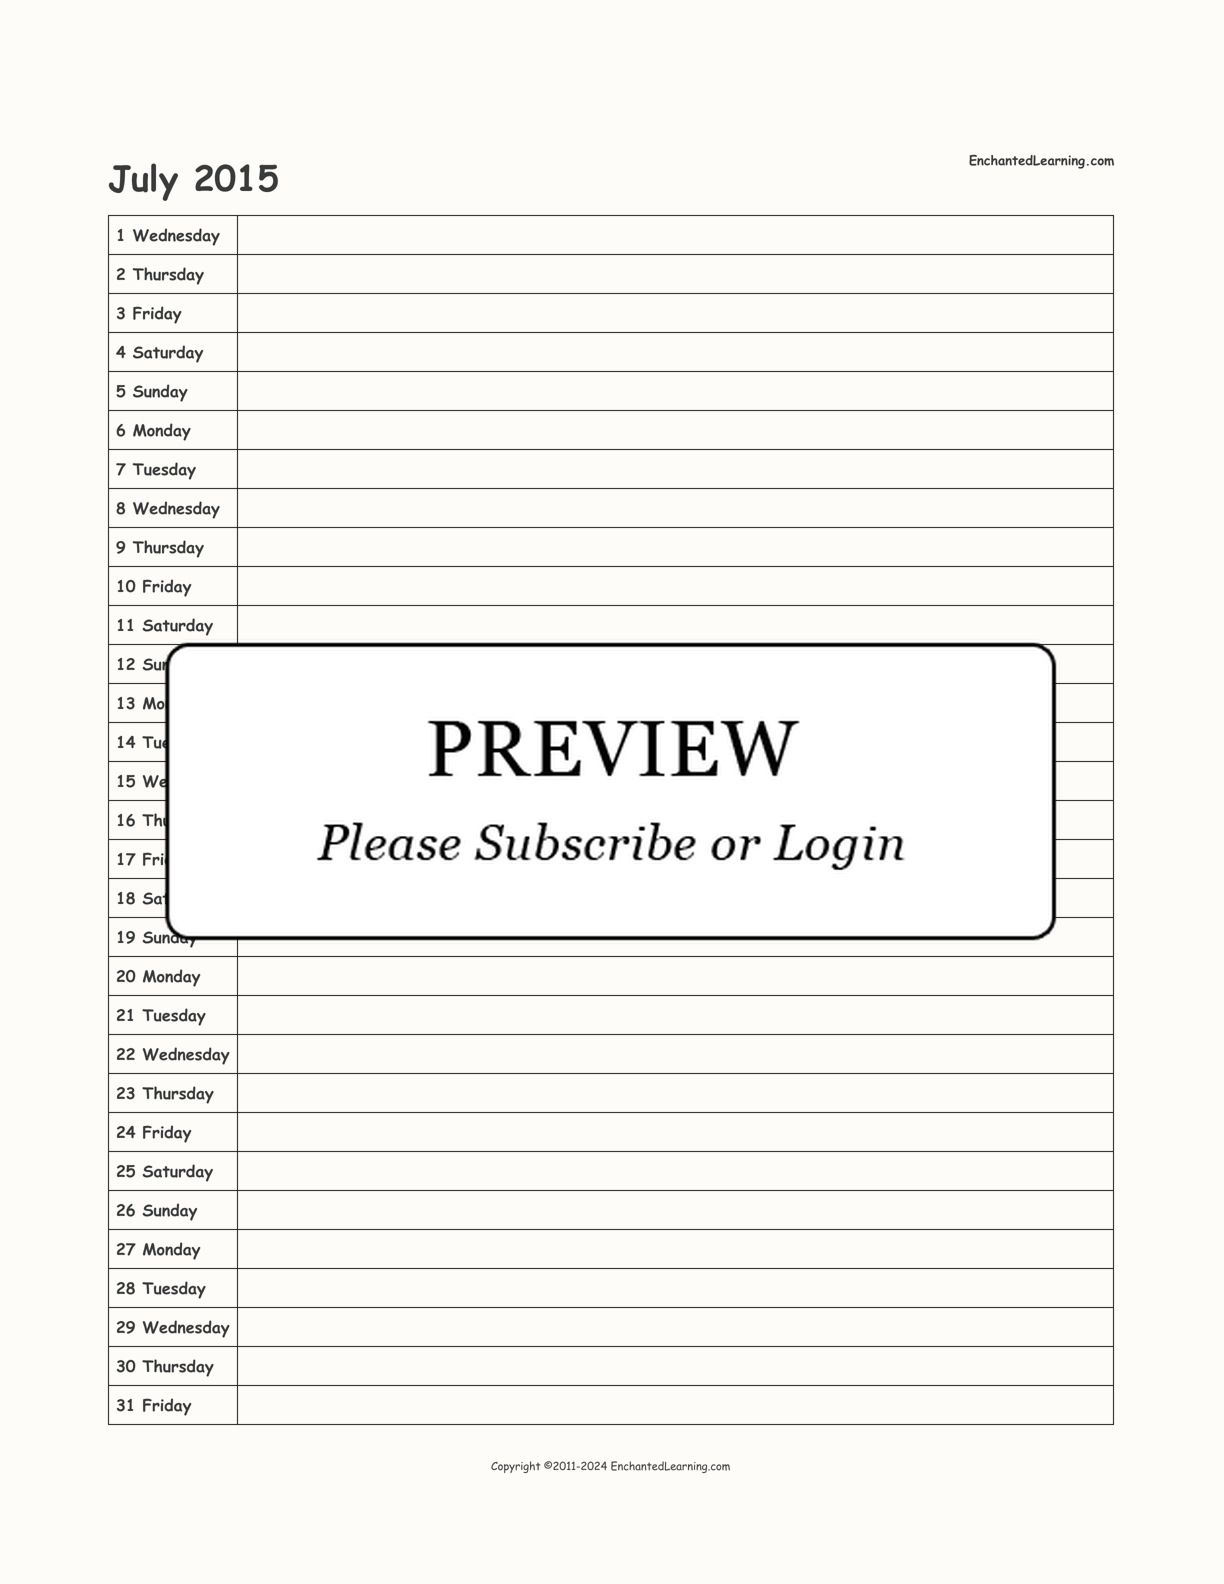 2015 Scheduling Calendar interactive printout page 7